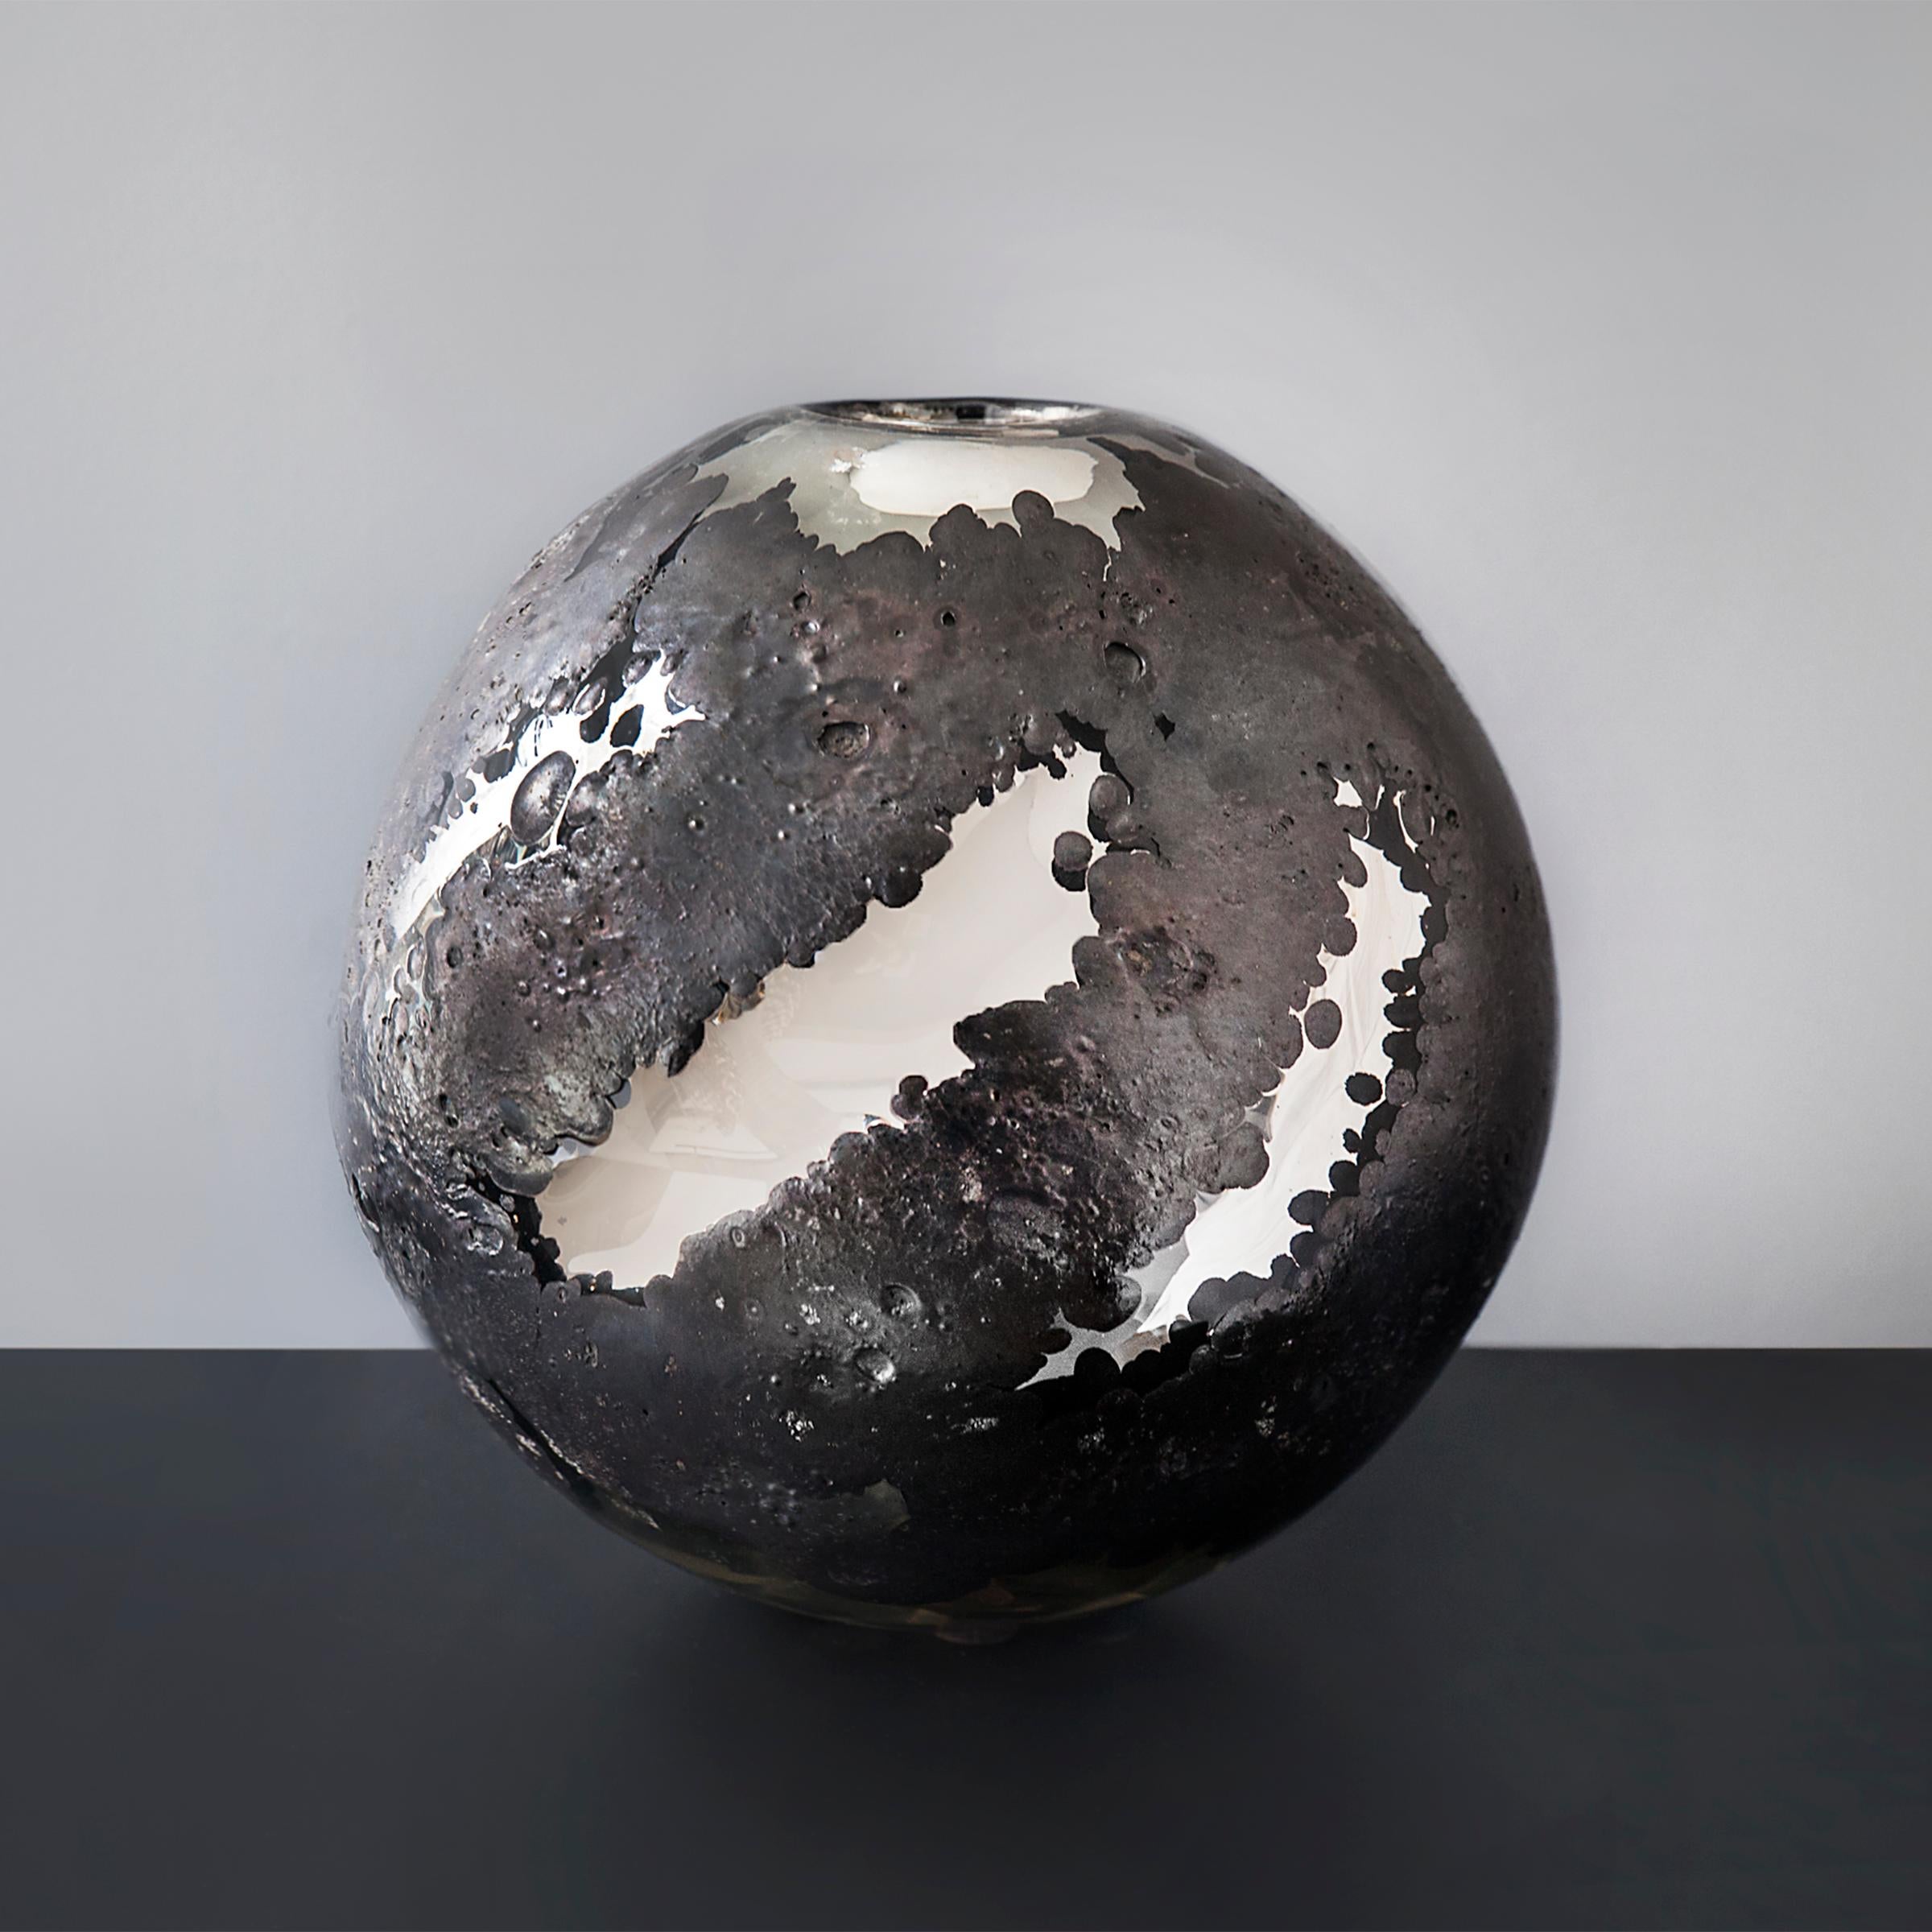 Hand blown Murano glass vase by Franco Deboni, Italy, 2016, with matte black cratered surface opening to reveal a mirrored glass interior, signed and dated to the underside.